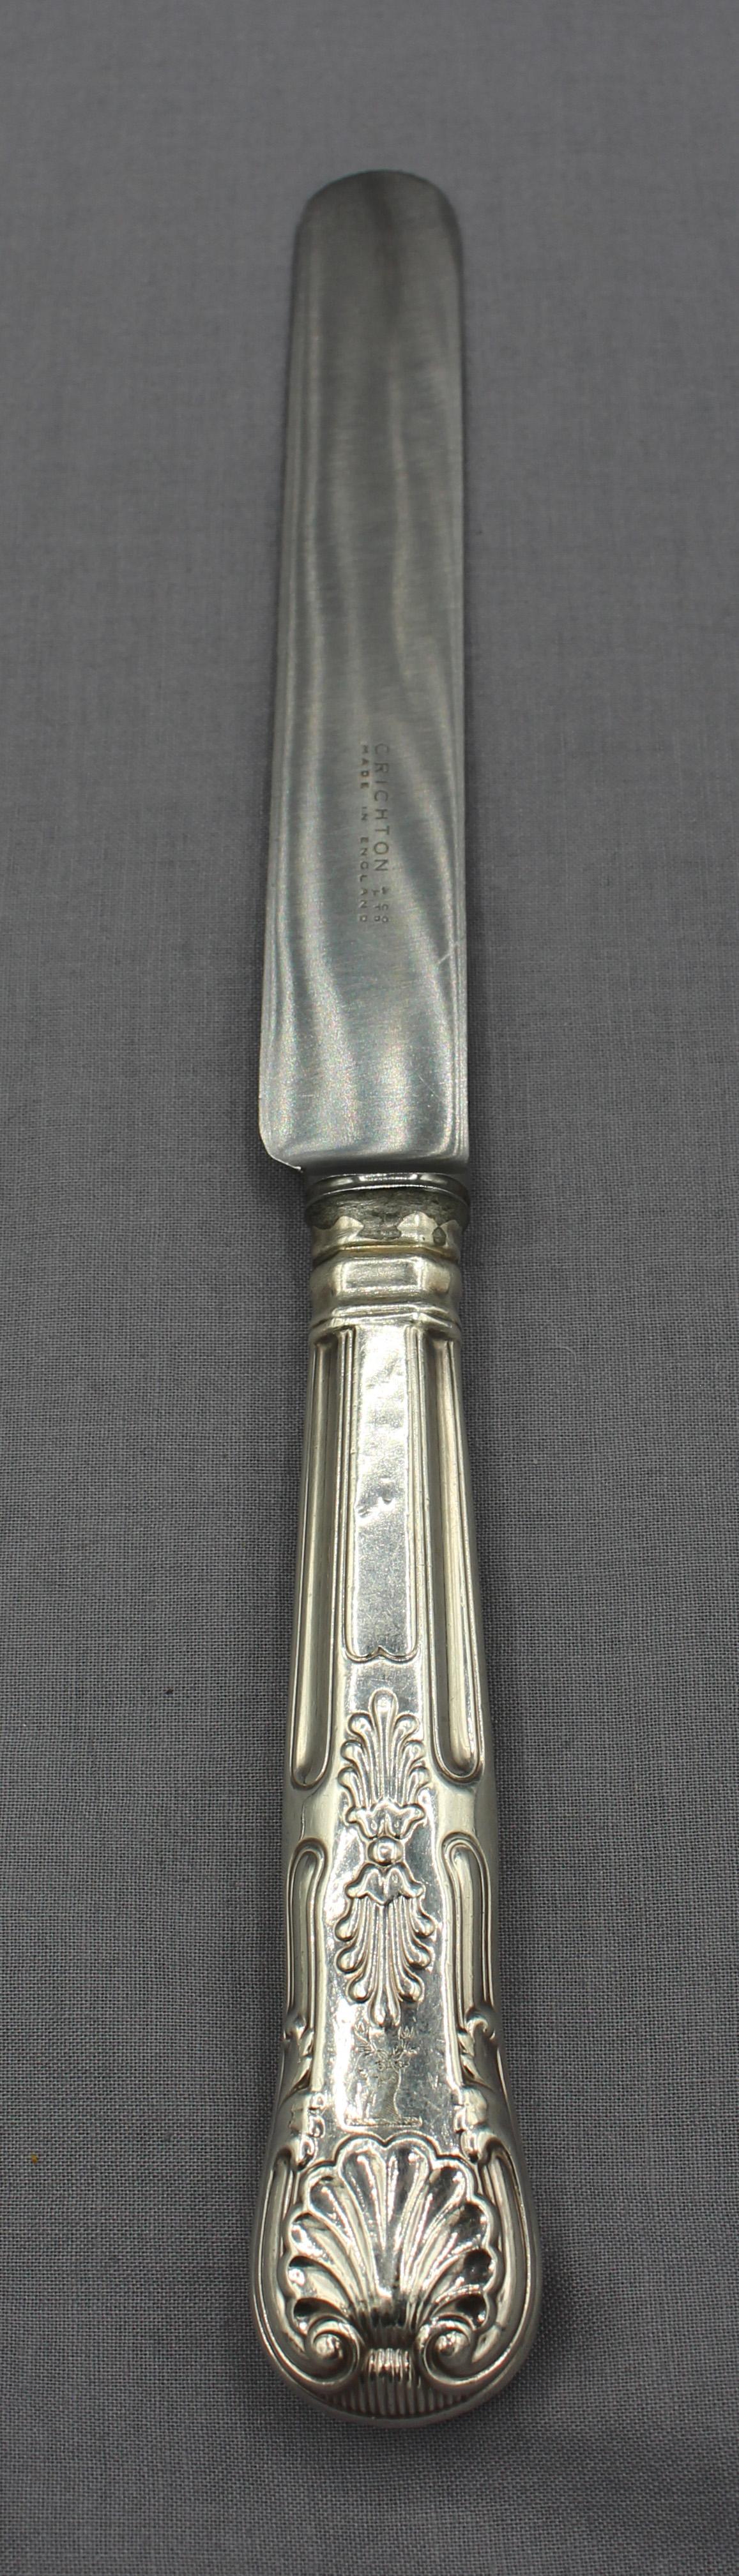 Rococo Revival 1803 Set of 8 King's Pattern Dinner Knives